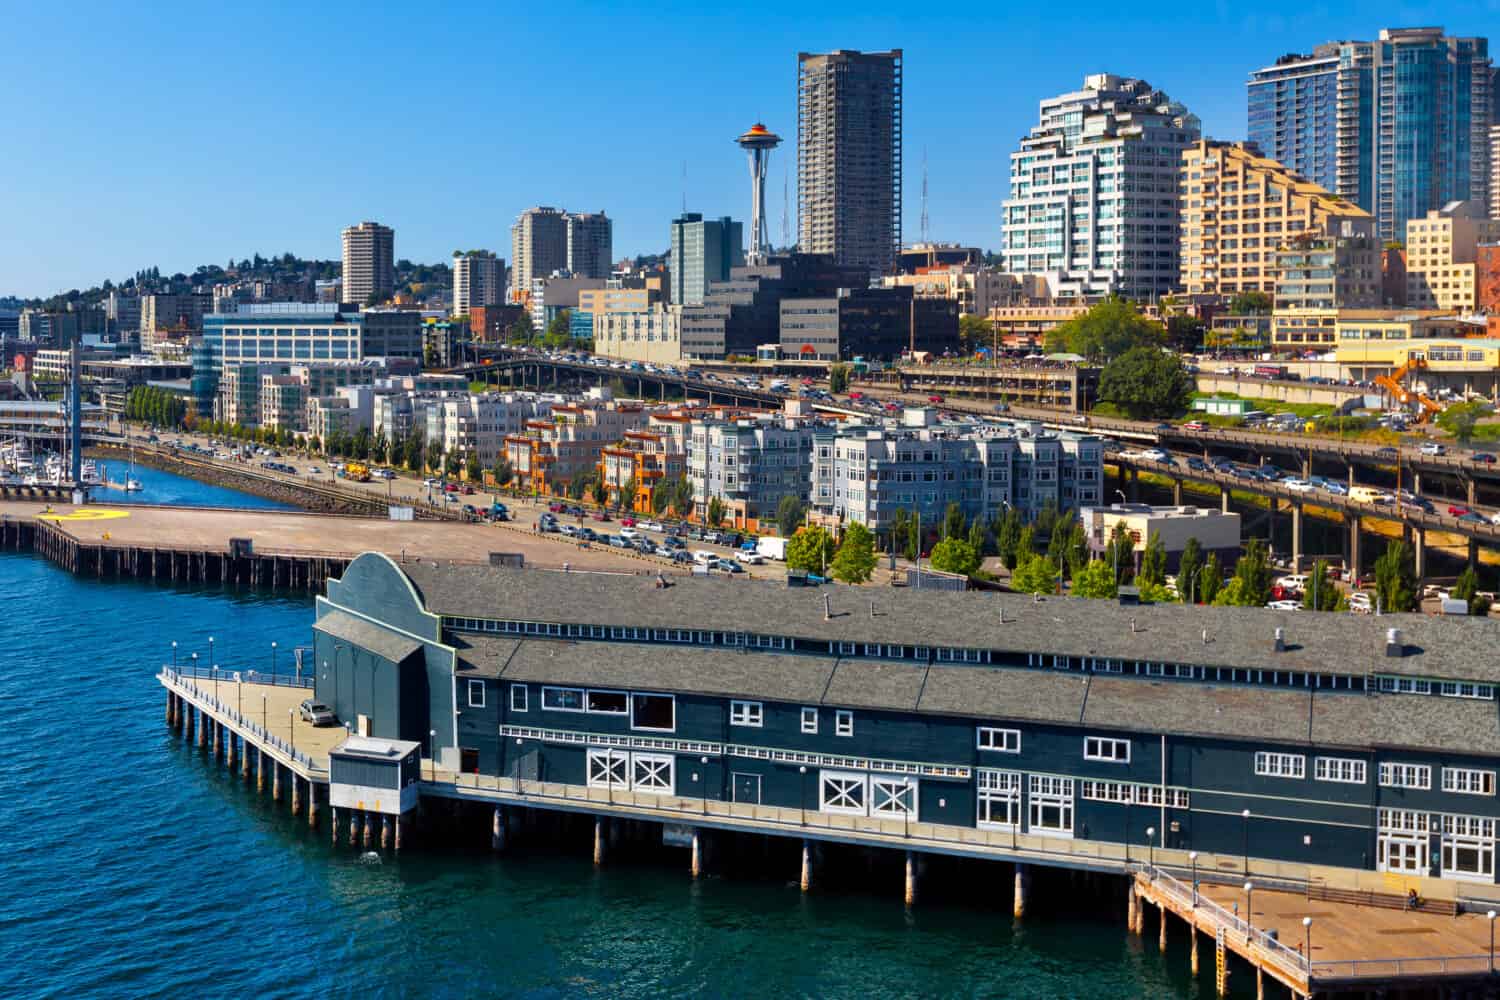 Aerial view of Seattle waterfront and skyline with the Space Needle in the background. There's traffic on the waterfront Alaskan Way Viaduct, the elevated double-decker Highway 99.